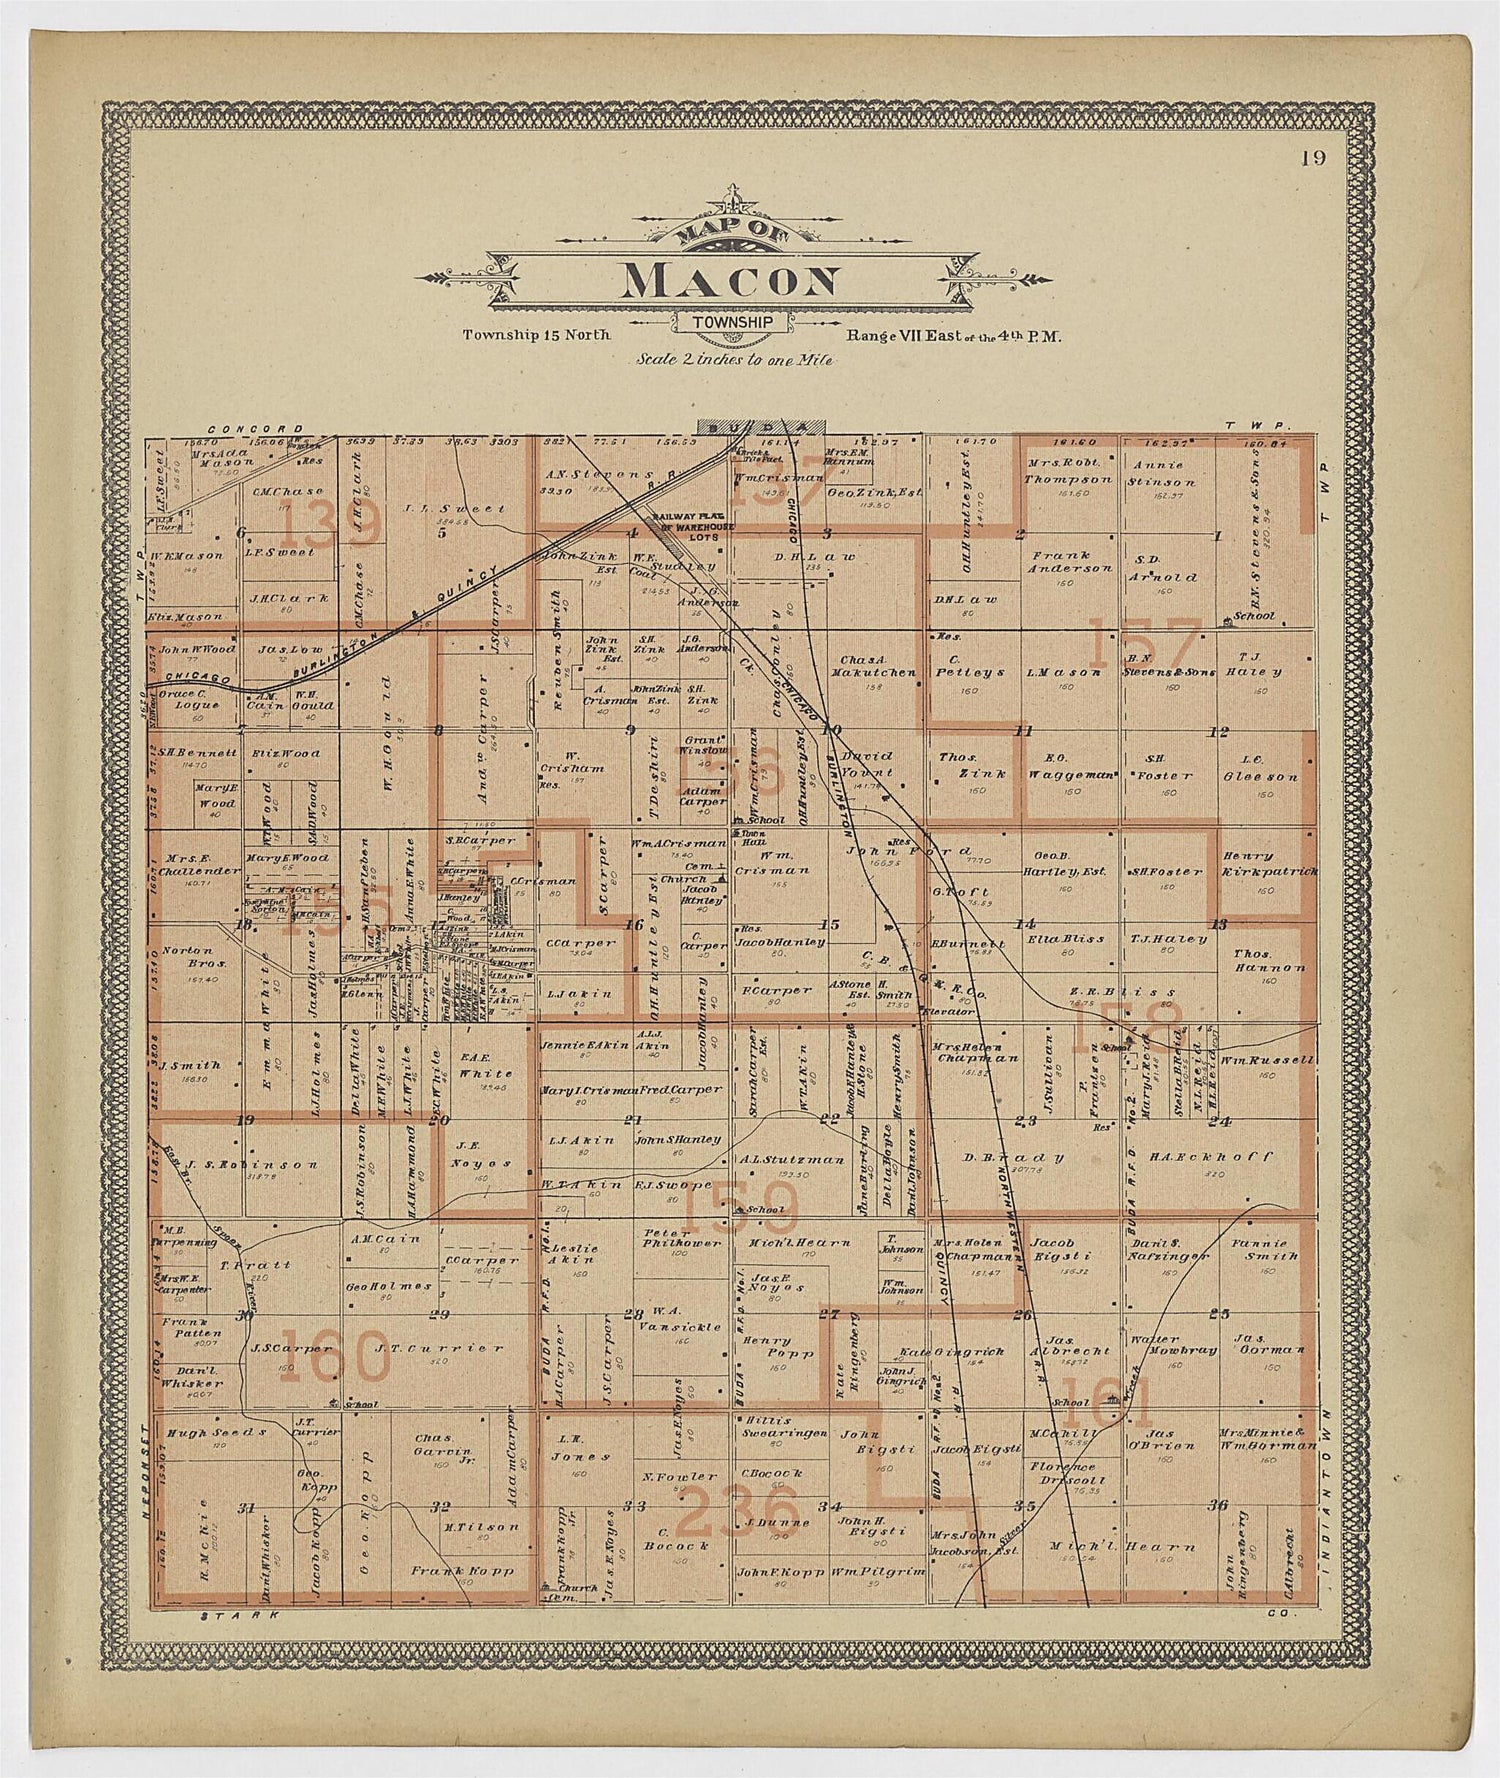 This old map of Image 11 of 20th Century Atlas of Bureau County, Illinois from Atlas of Bureau County, Illinois from 1905 was created by  Middle-West Publishing Co in 1905